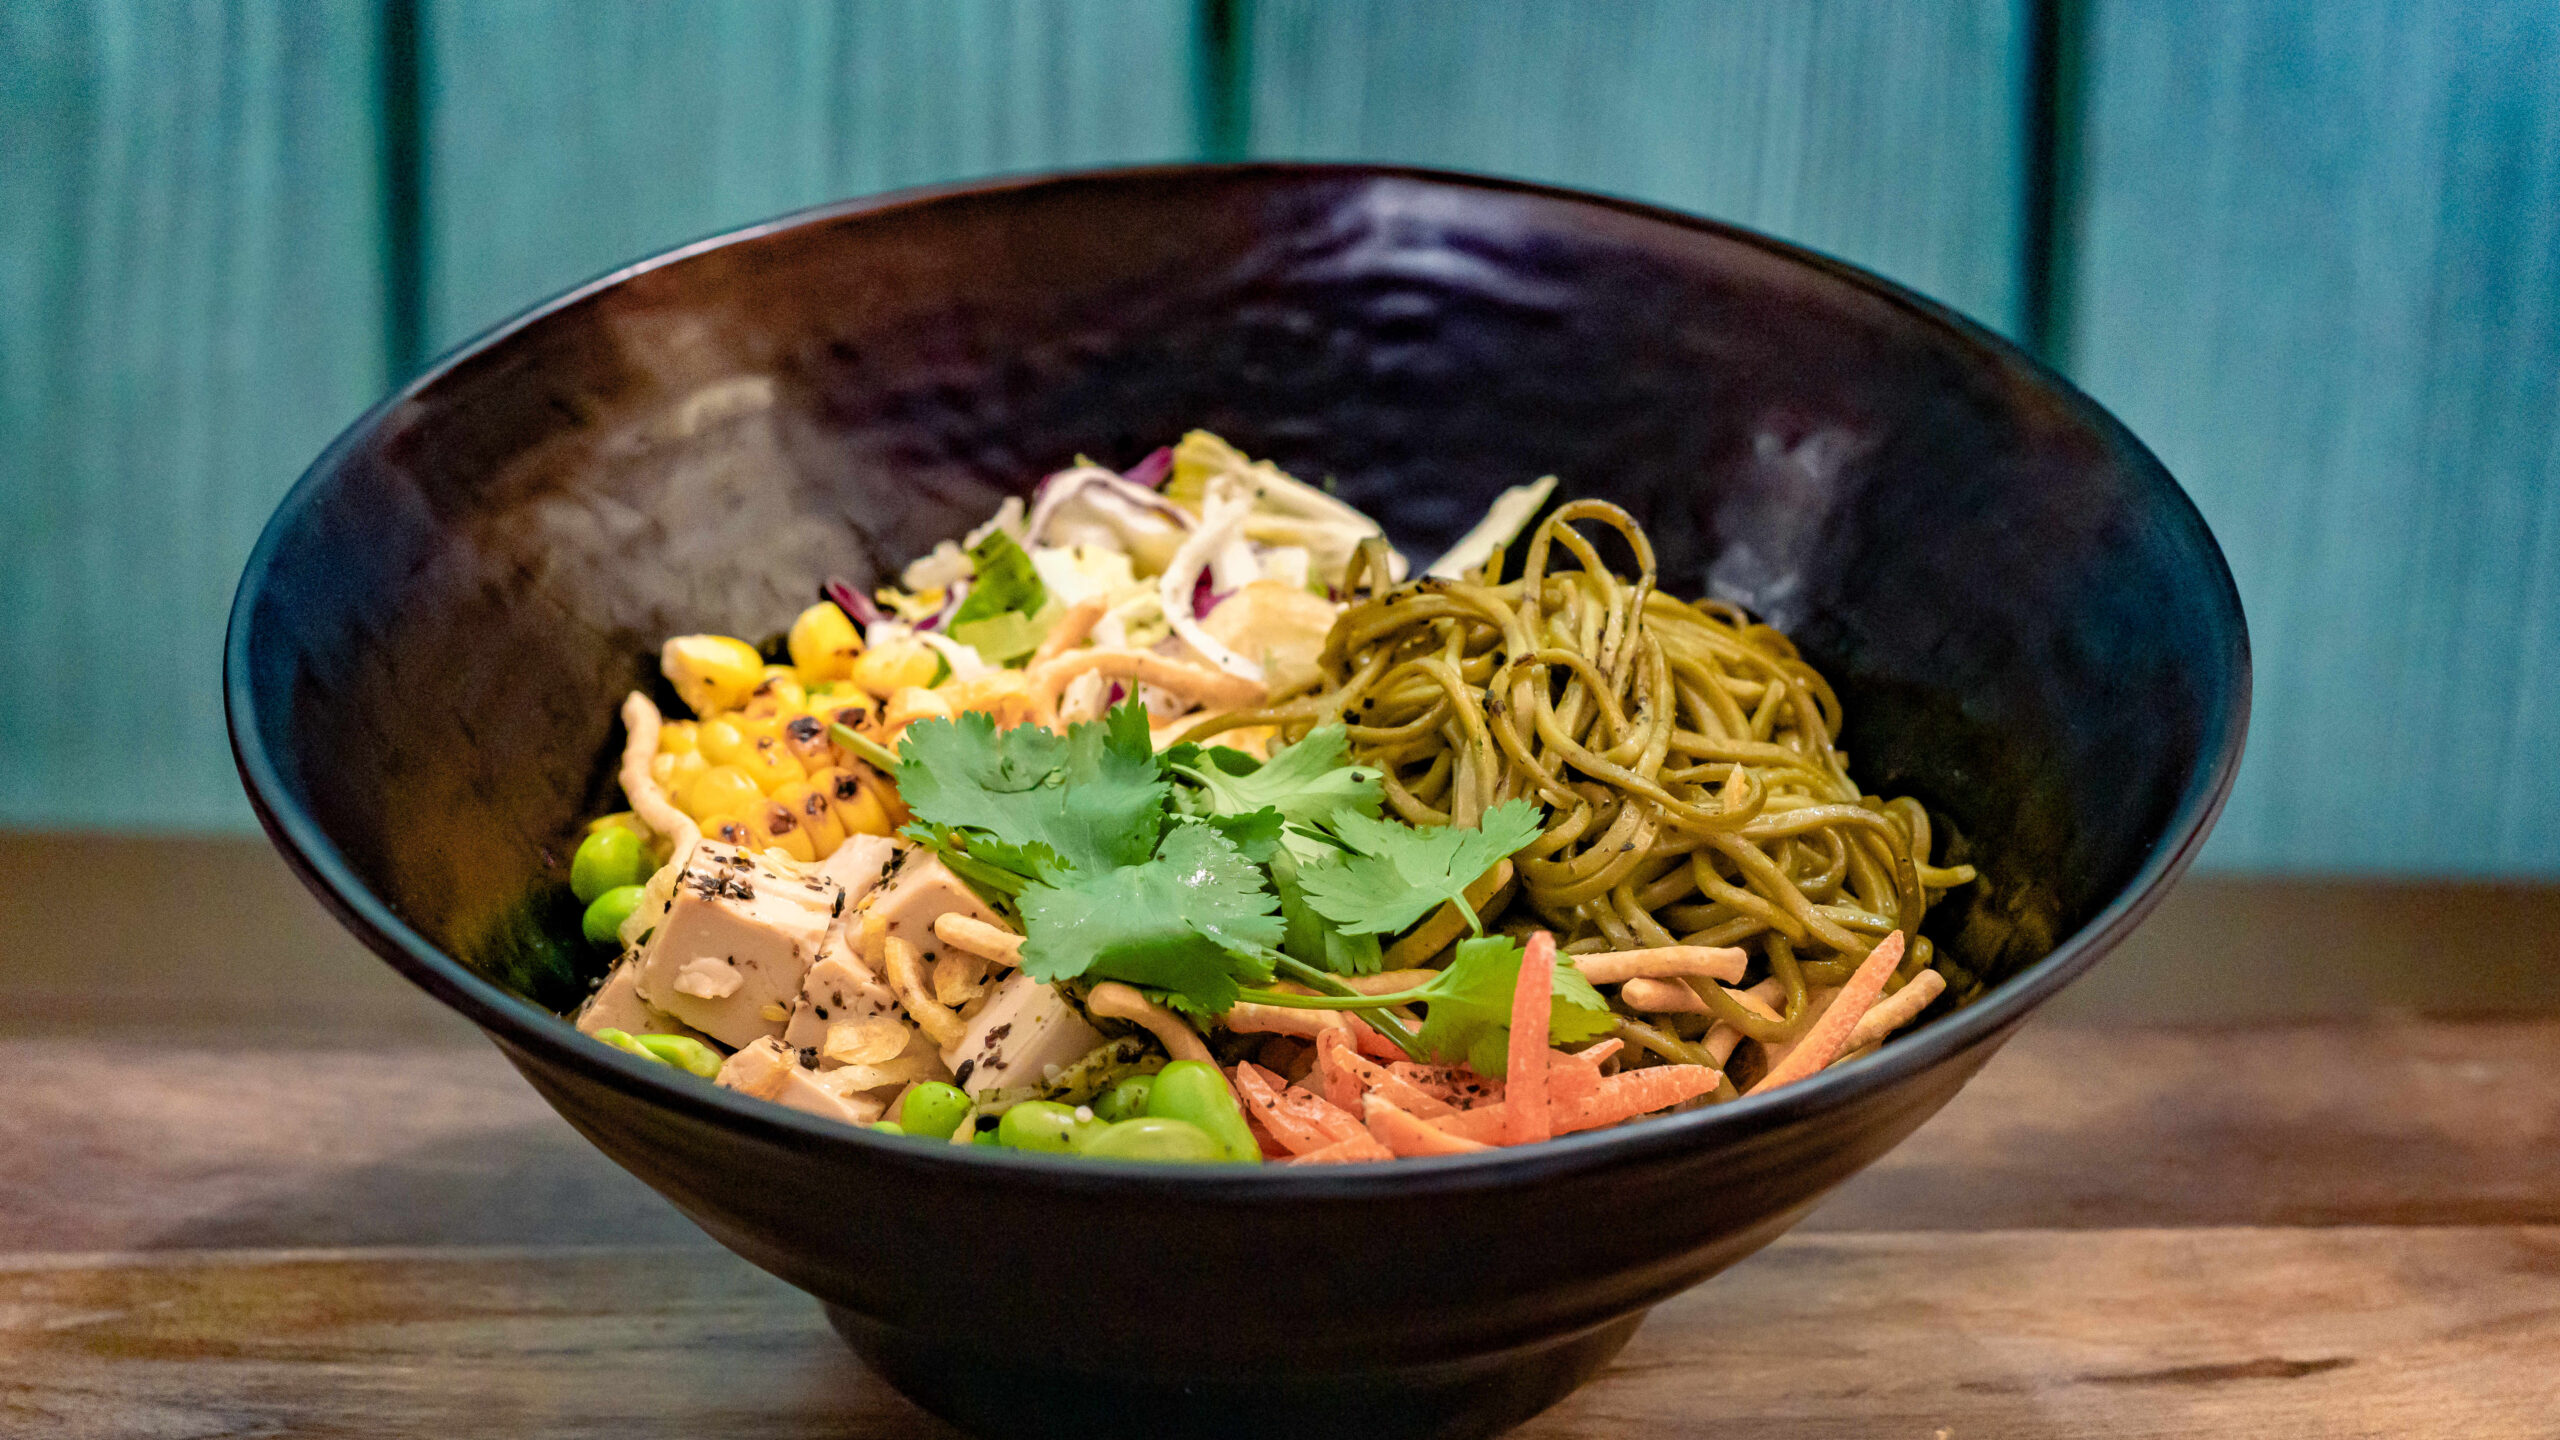 Soba Noodle Salad (Aunt Cass Café) – with tofu, cabbage, edamame, carrots, roasted corn, scallions, and cilantro topped with crispy shallots and sesame ginger dressing. Available later in summer 2023.For more details, visit DisneyParksBlog.com. (David Nguyen/Disneyland Resort)